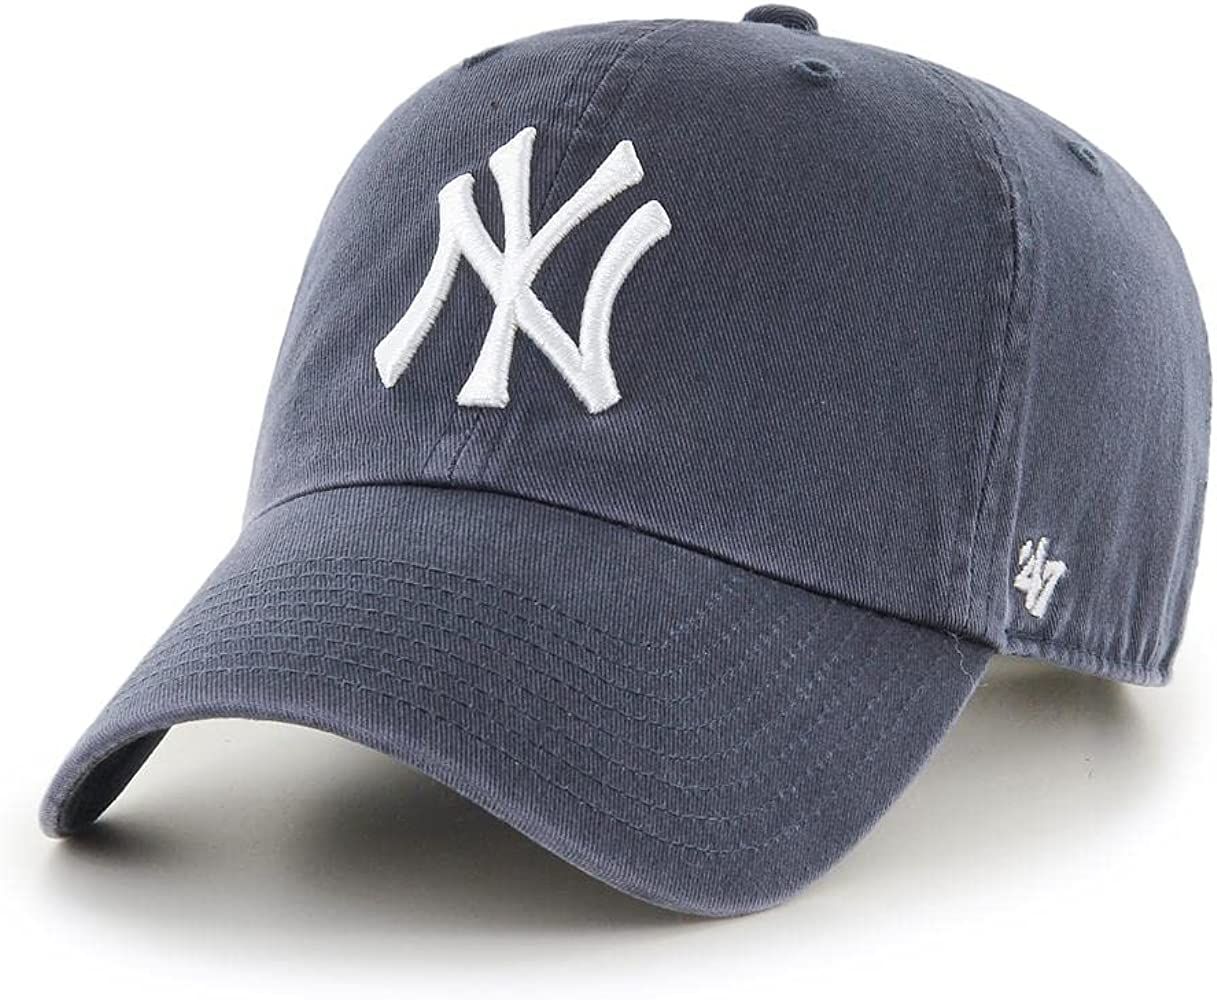 '47 MLB Vintage Navy Clean Up Adjustable Hat, Adult (New York Yankees Navy), One Size | Amazon (US)